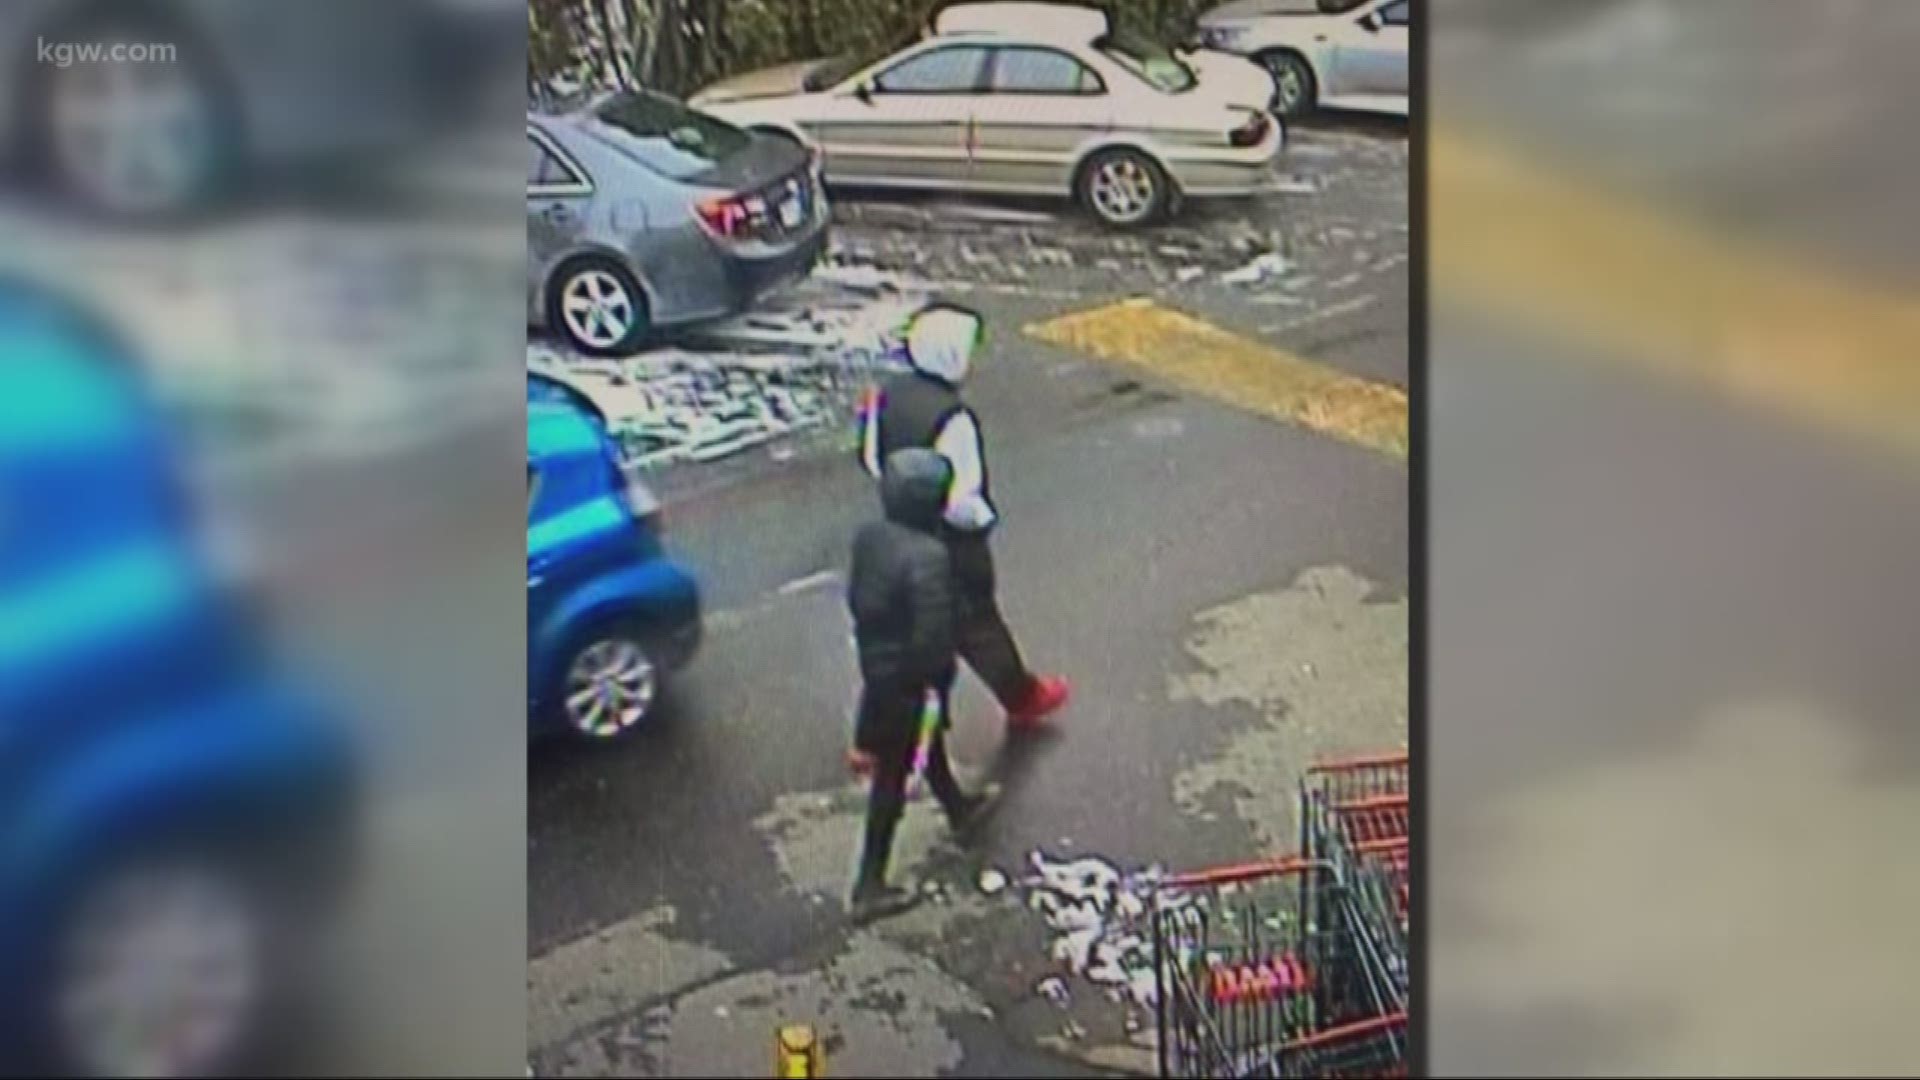 Police are investigating a string of thefts and robberies in Northeast Portland’s Jade District. The suspects are targeting elderly Asian women carrying purses, and at least two people have been hurt.